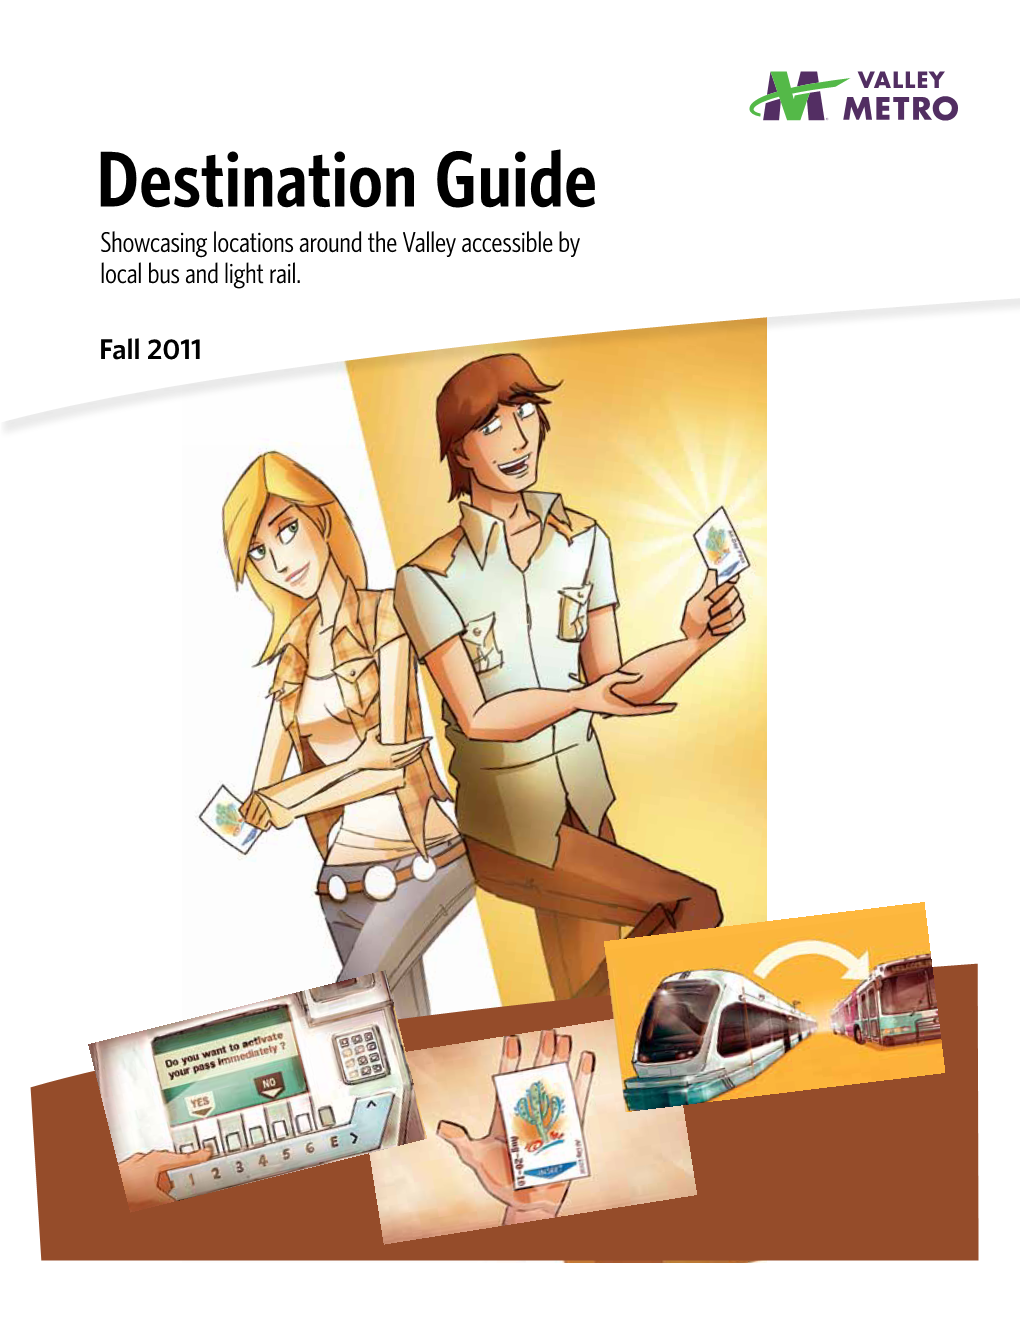 Destination Guide Showcasing Locations Around the Valley Accessible by Local Bus and Light Rail